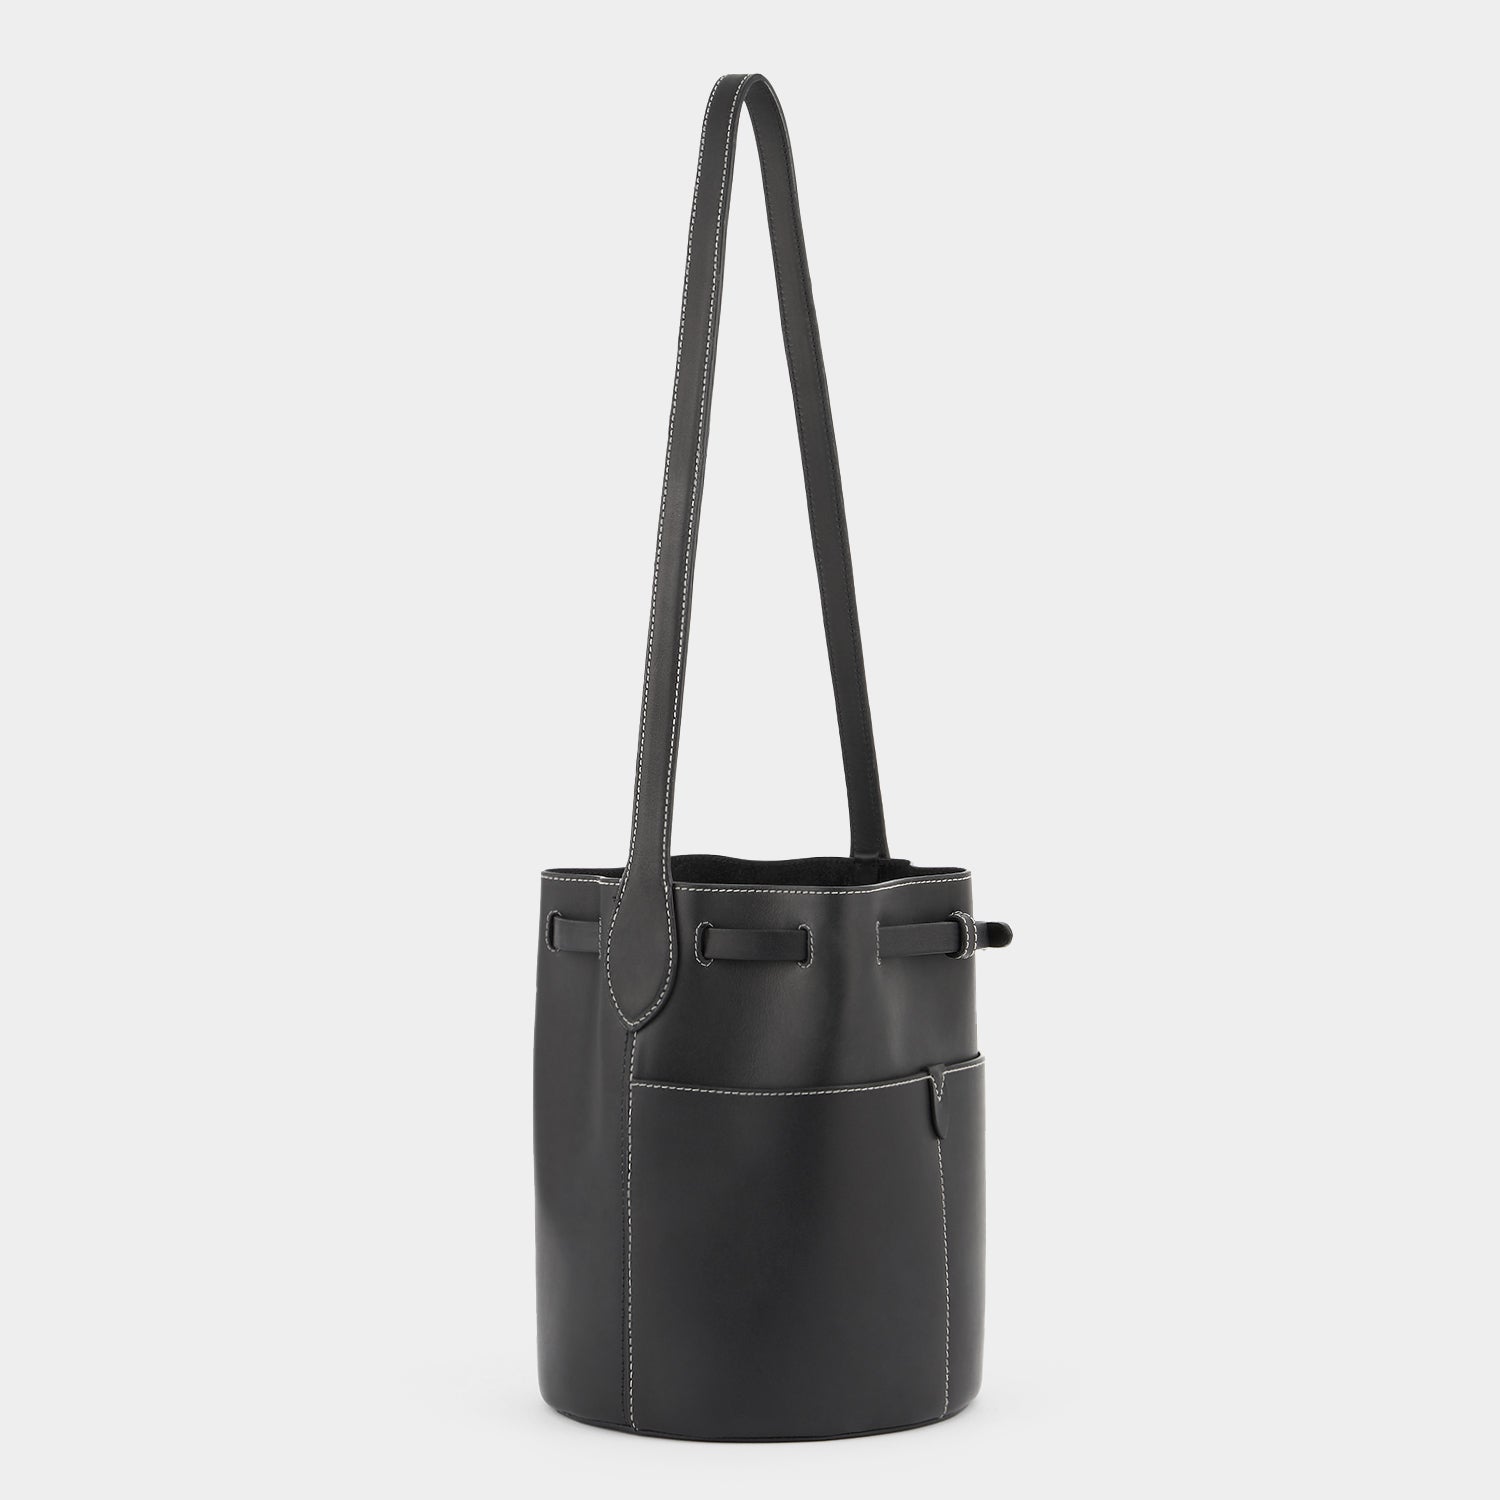 Return to Nature Small Bucket Bag -

                  
                    Compostable Leather in Black -
                  

                  Anya Hindmarch US
